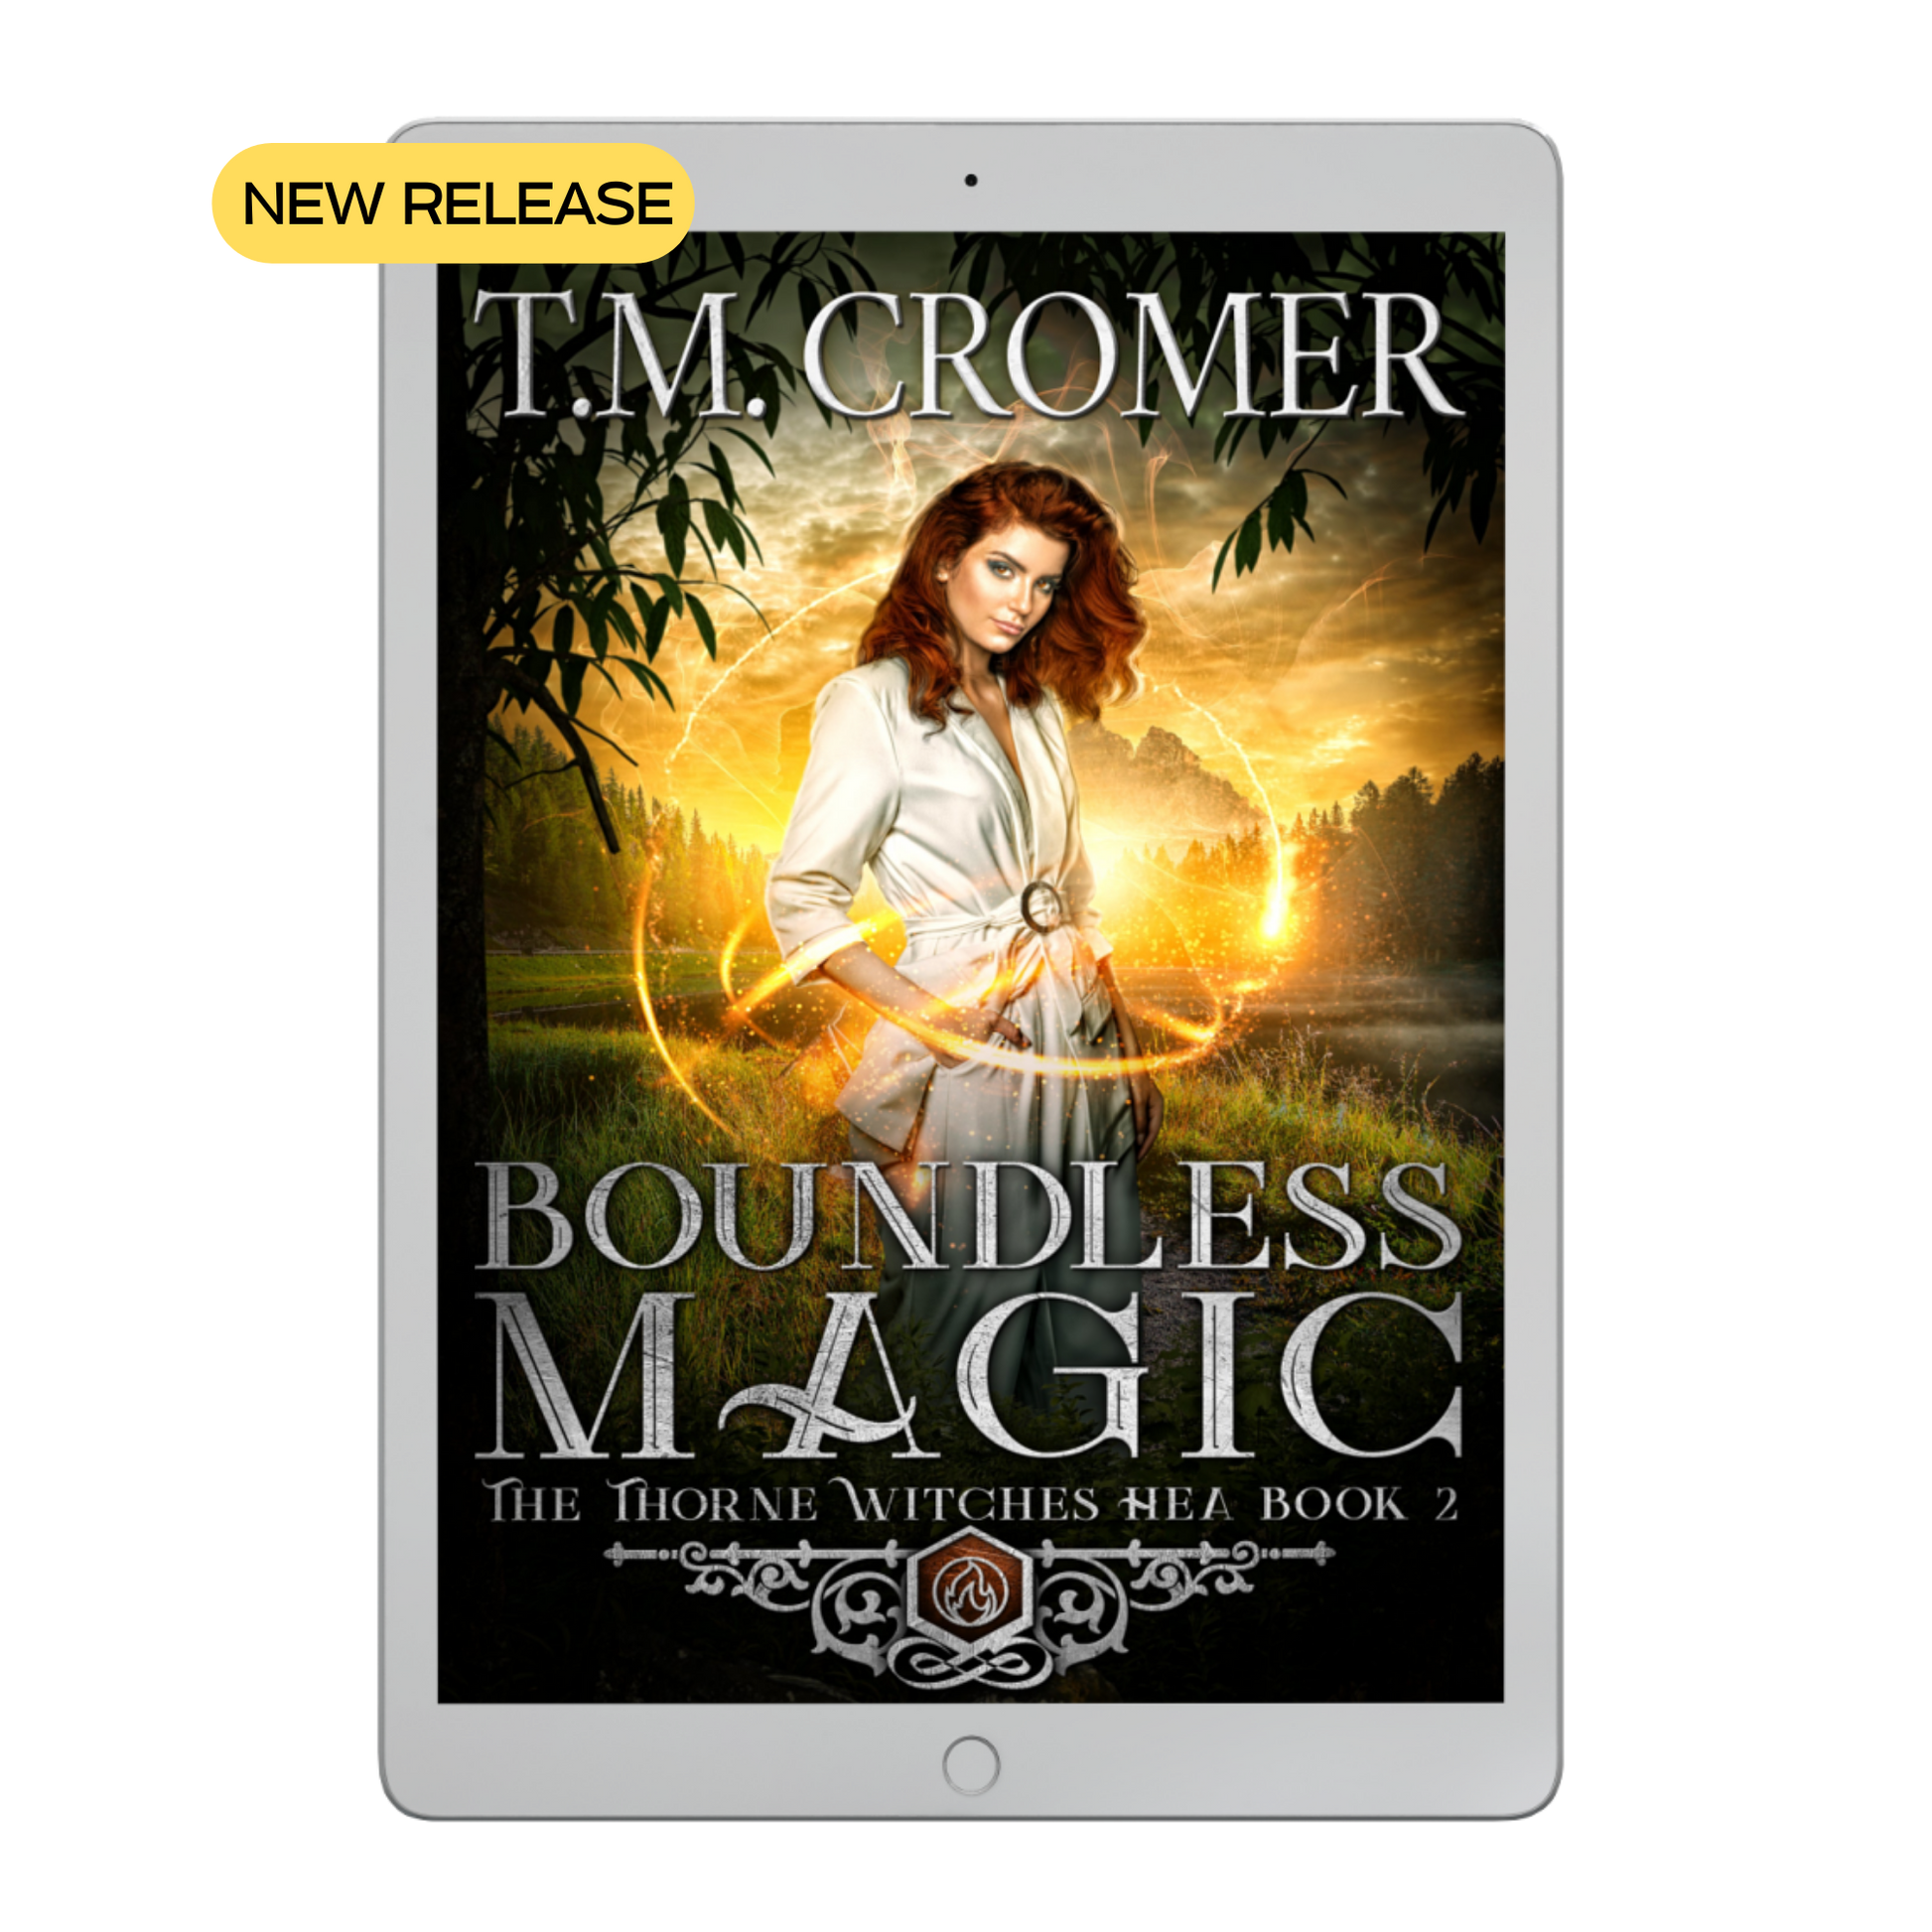 Boundless Magic The Thorne Witches HEA #2 Ebook Paranormal Romance, Urban Fantasy, Magical Realism